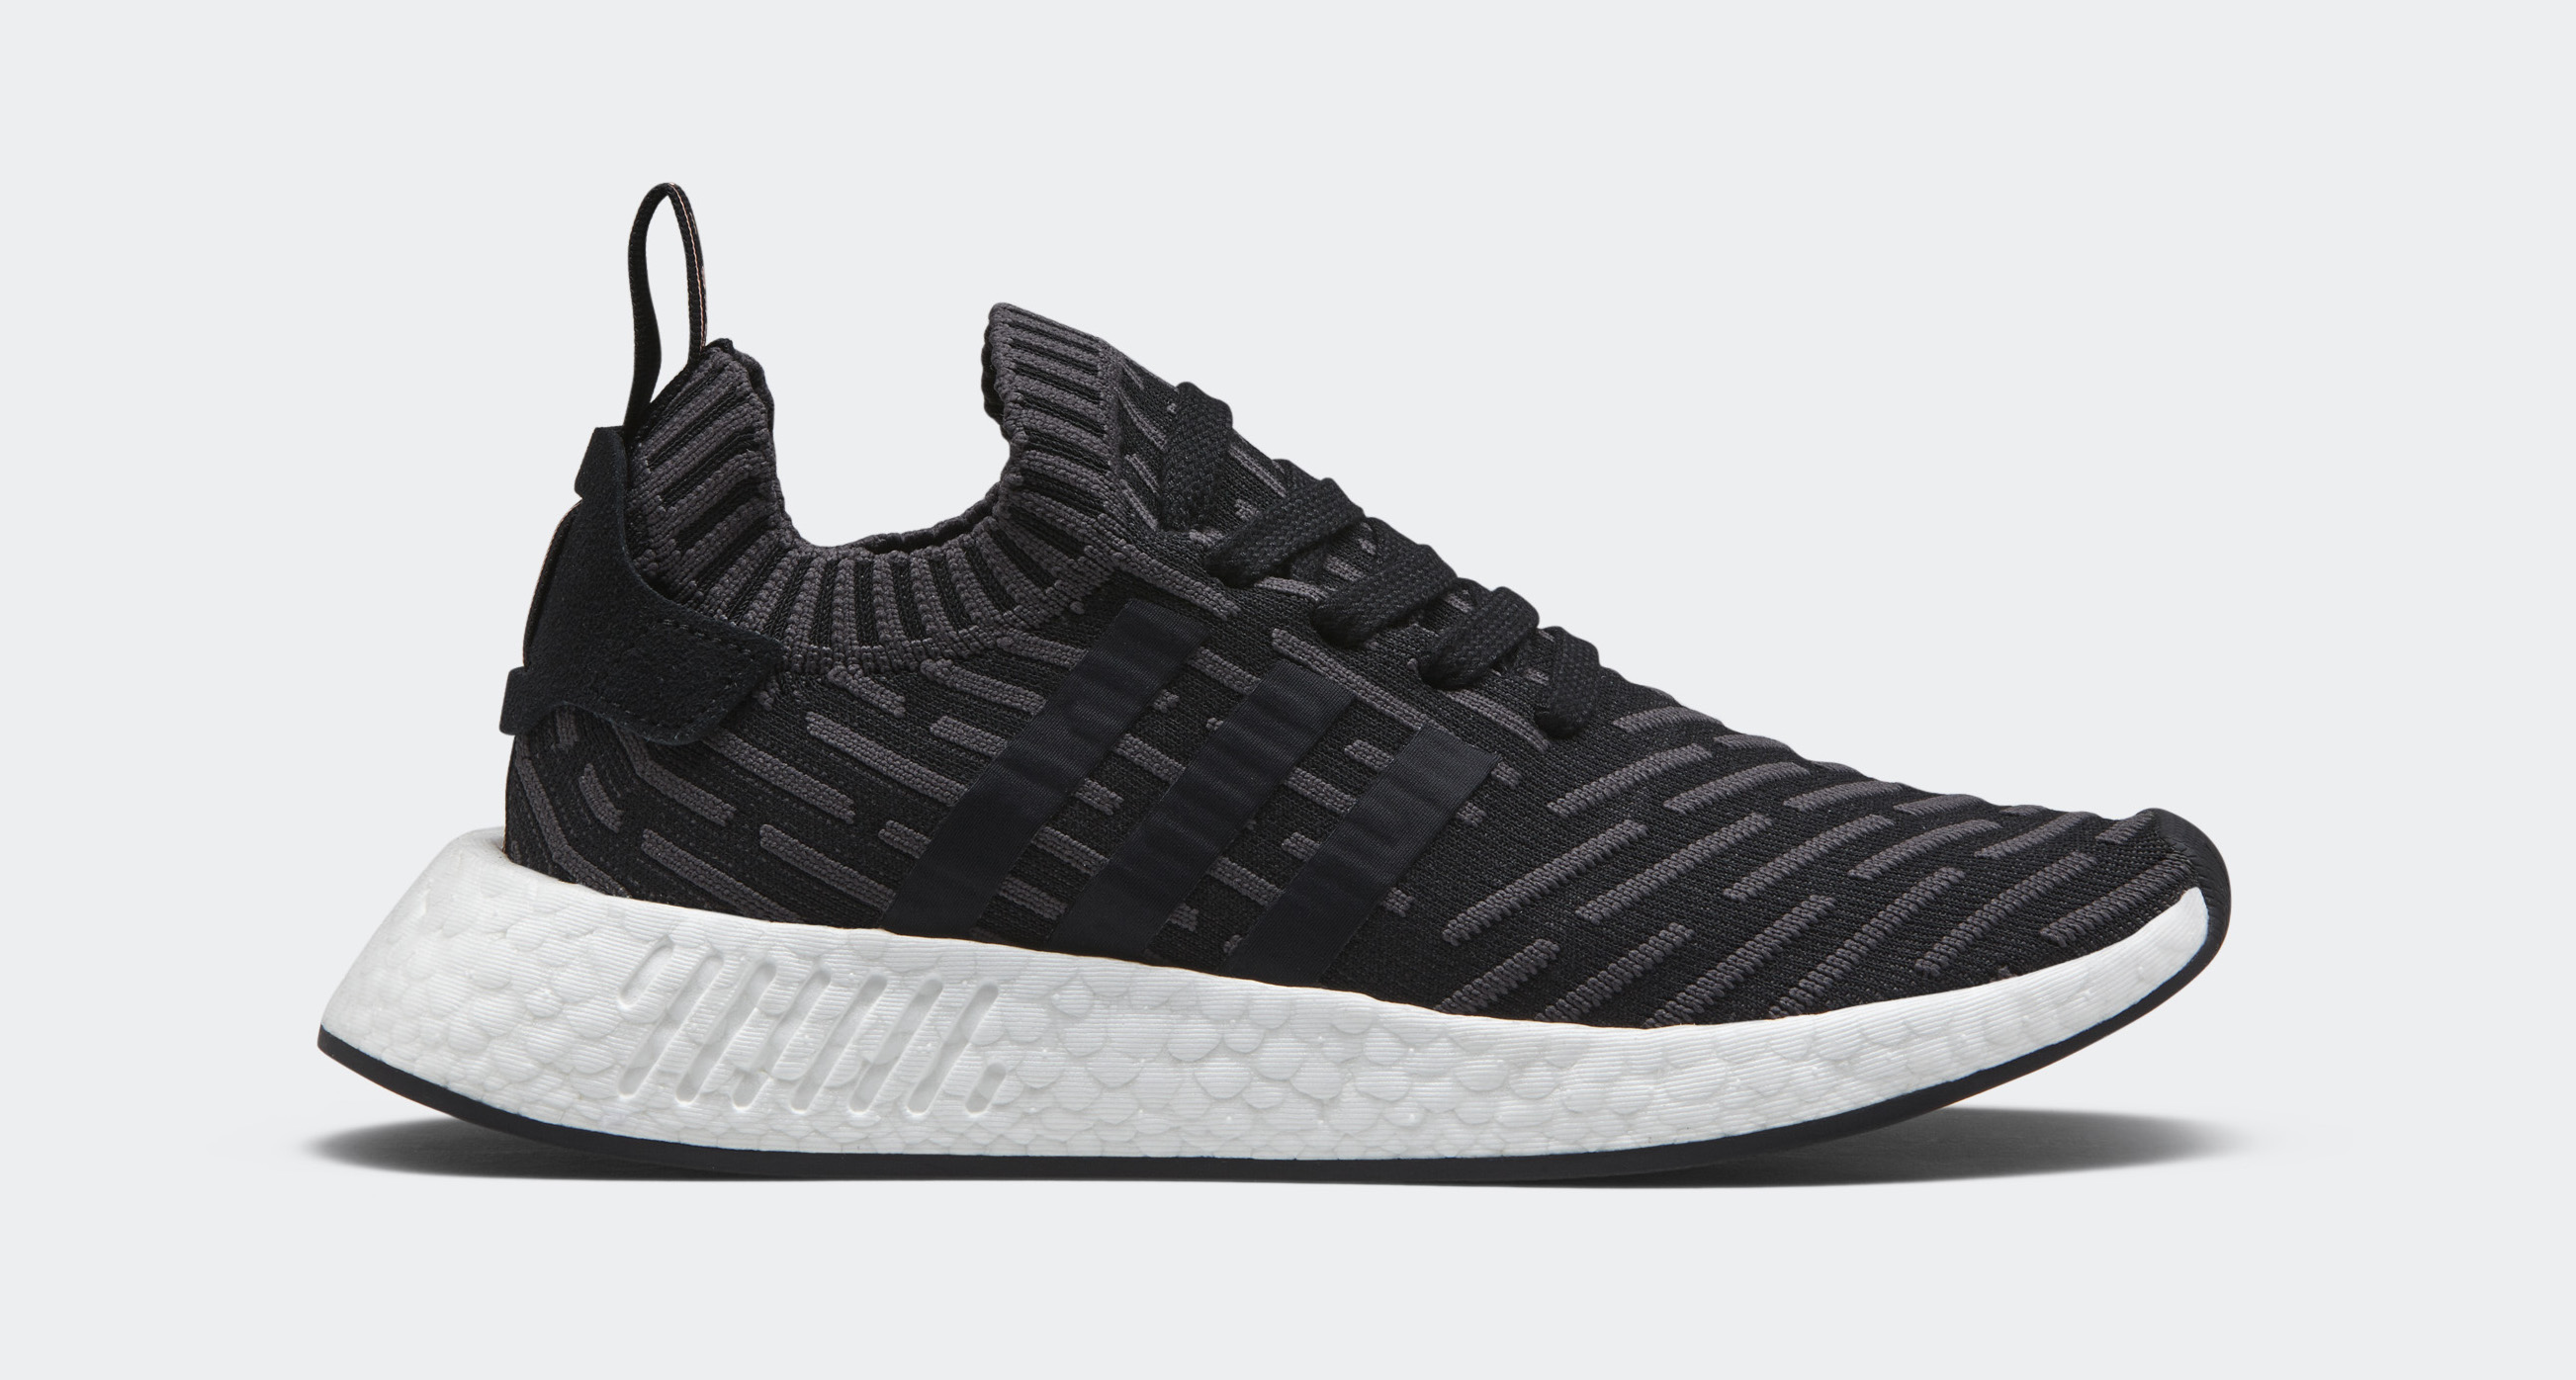 adidas Officially Announces the NMD R2, Available in December - WearTesters